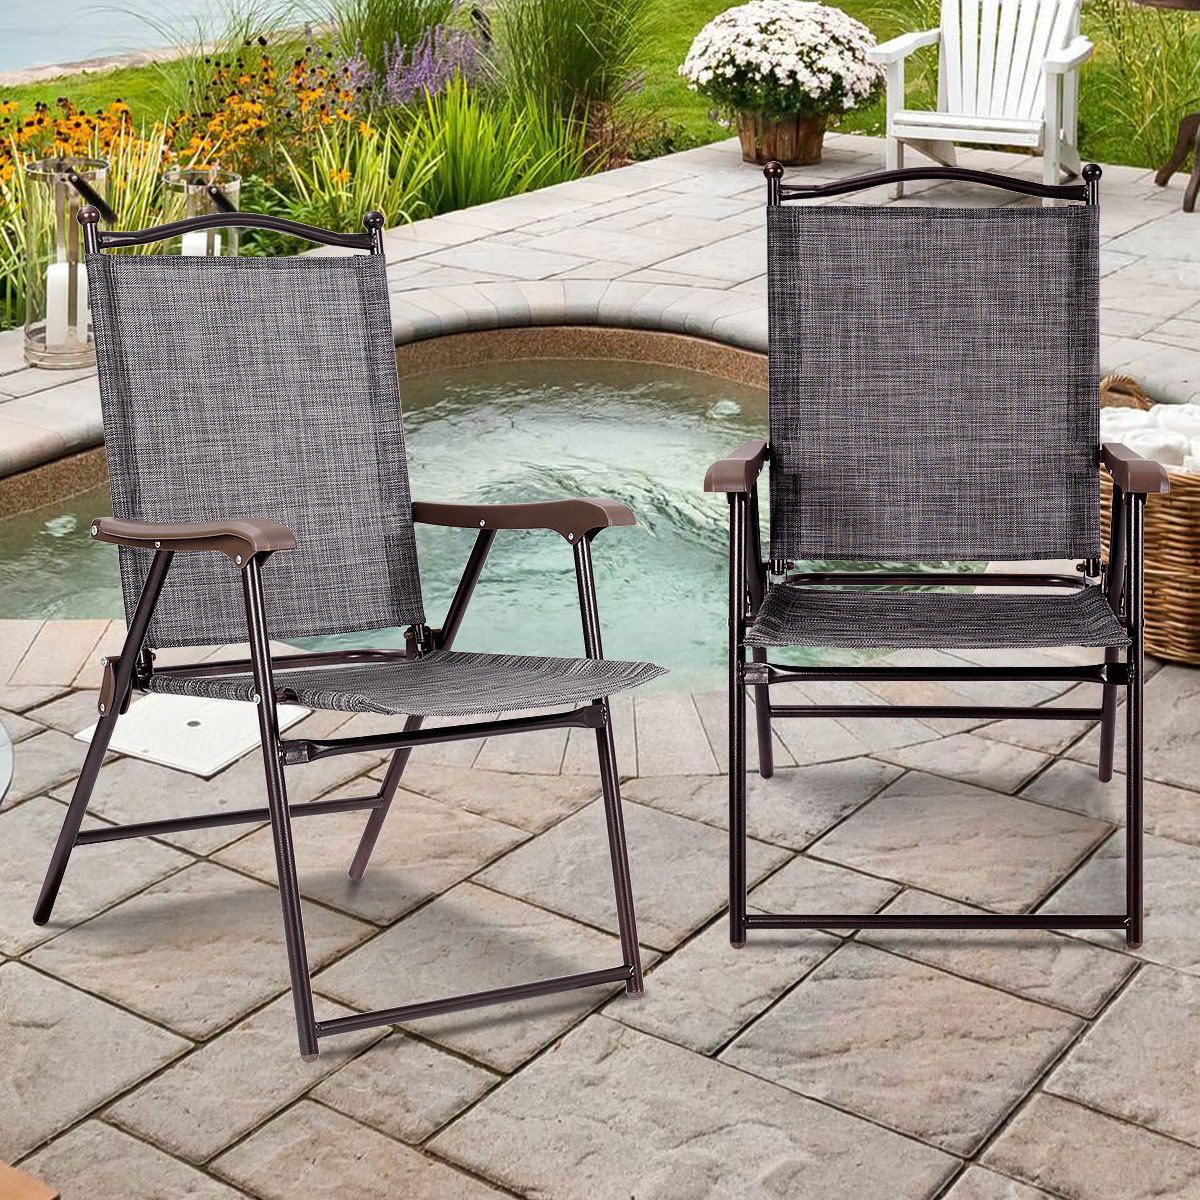 Set Of 2 Folding Patio Furniture Sling Back Chairs Outdoors Gray